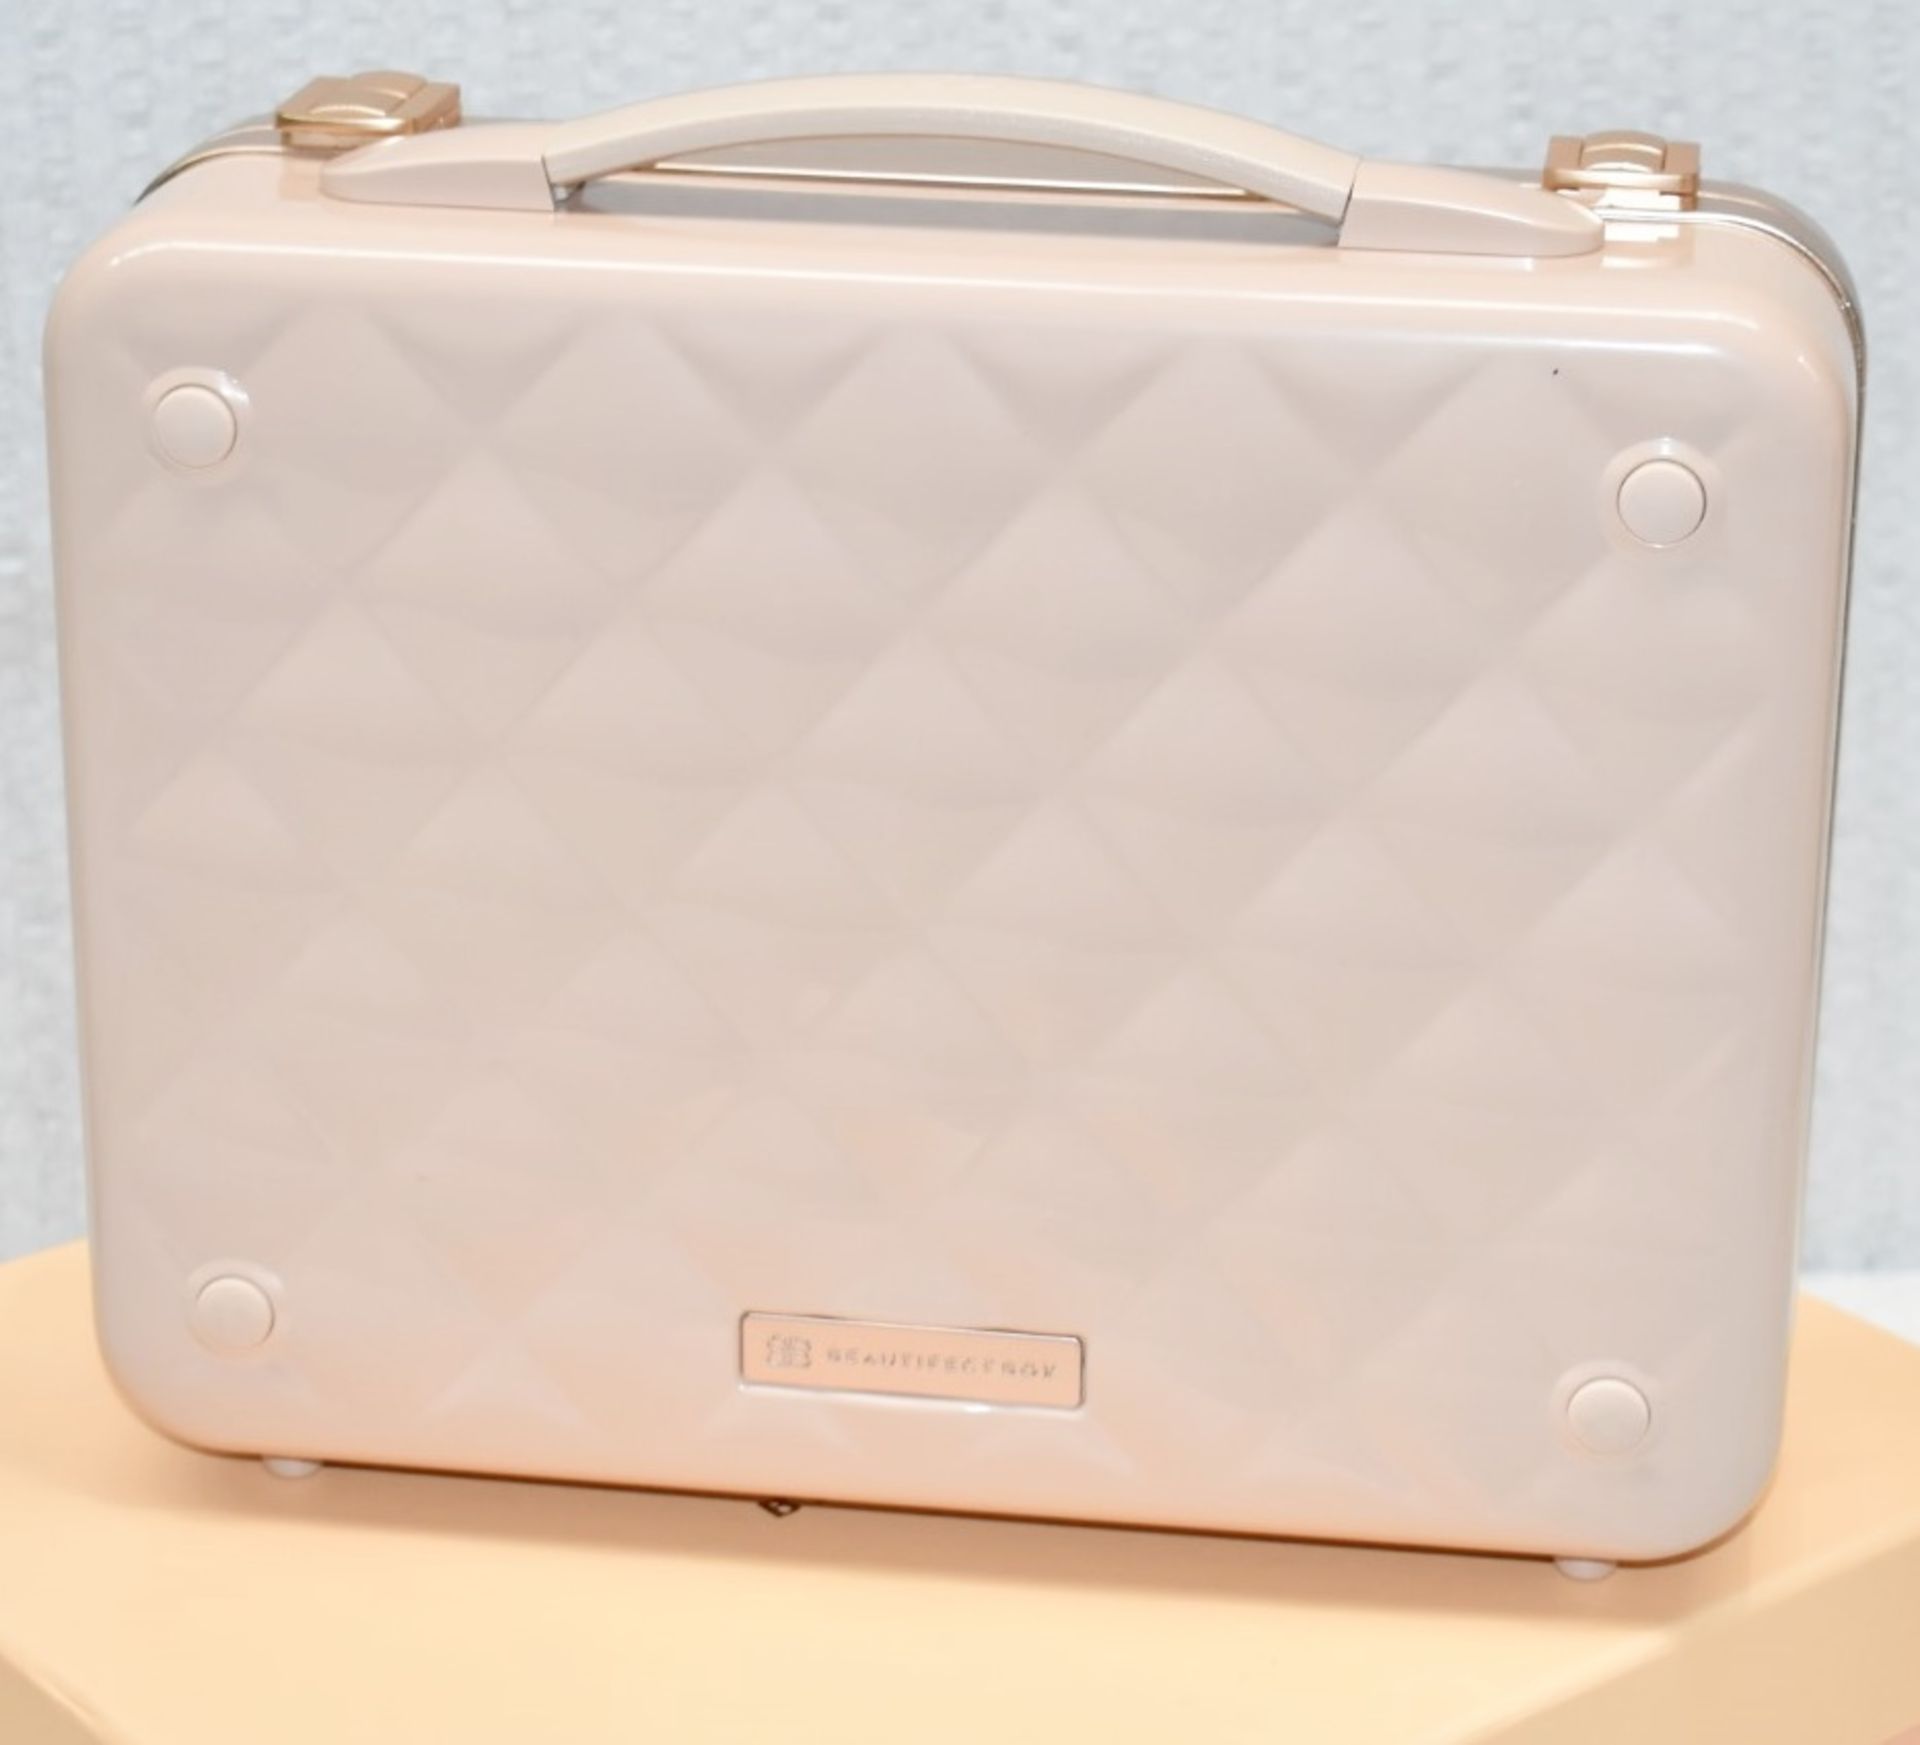 1 x BEAUTIFECT 'Beautifect Box' Make-Up Carry Case With Built-in Mirror - RRP £279.00 - Image 11 of 13